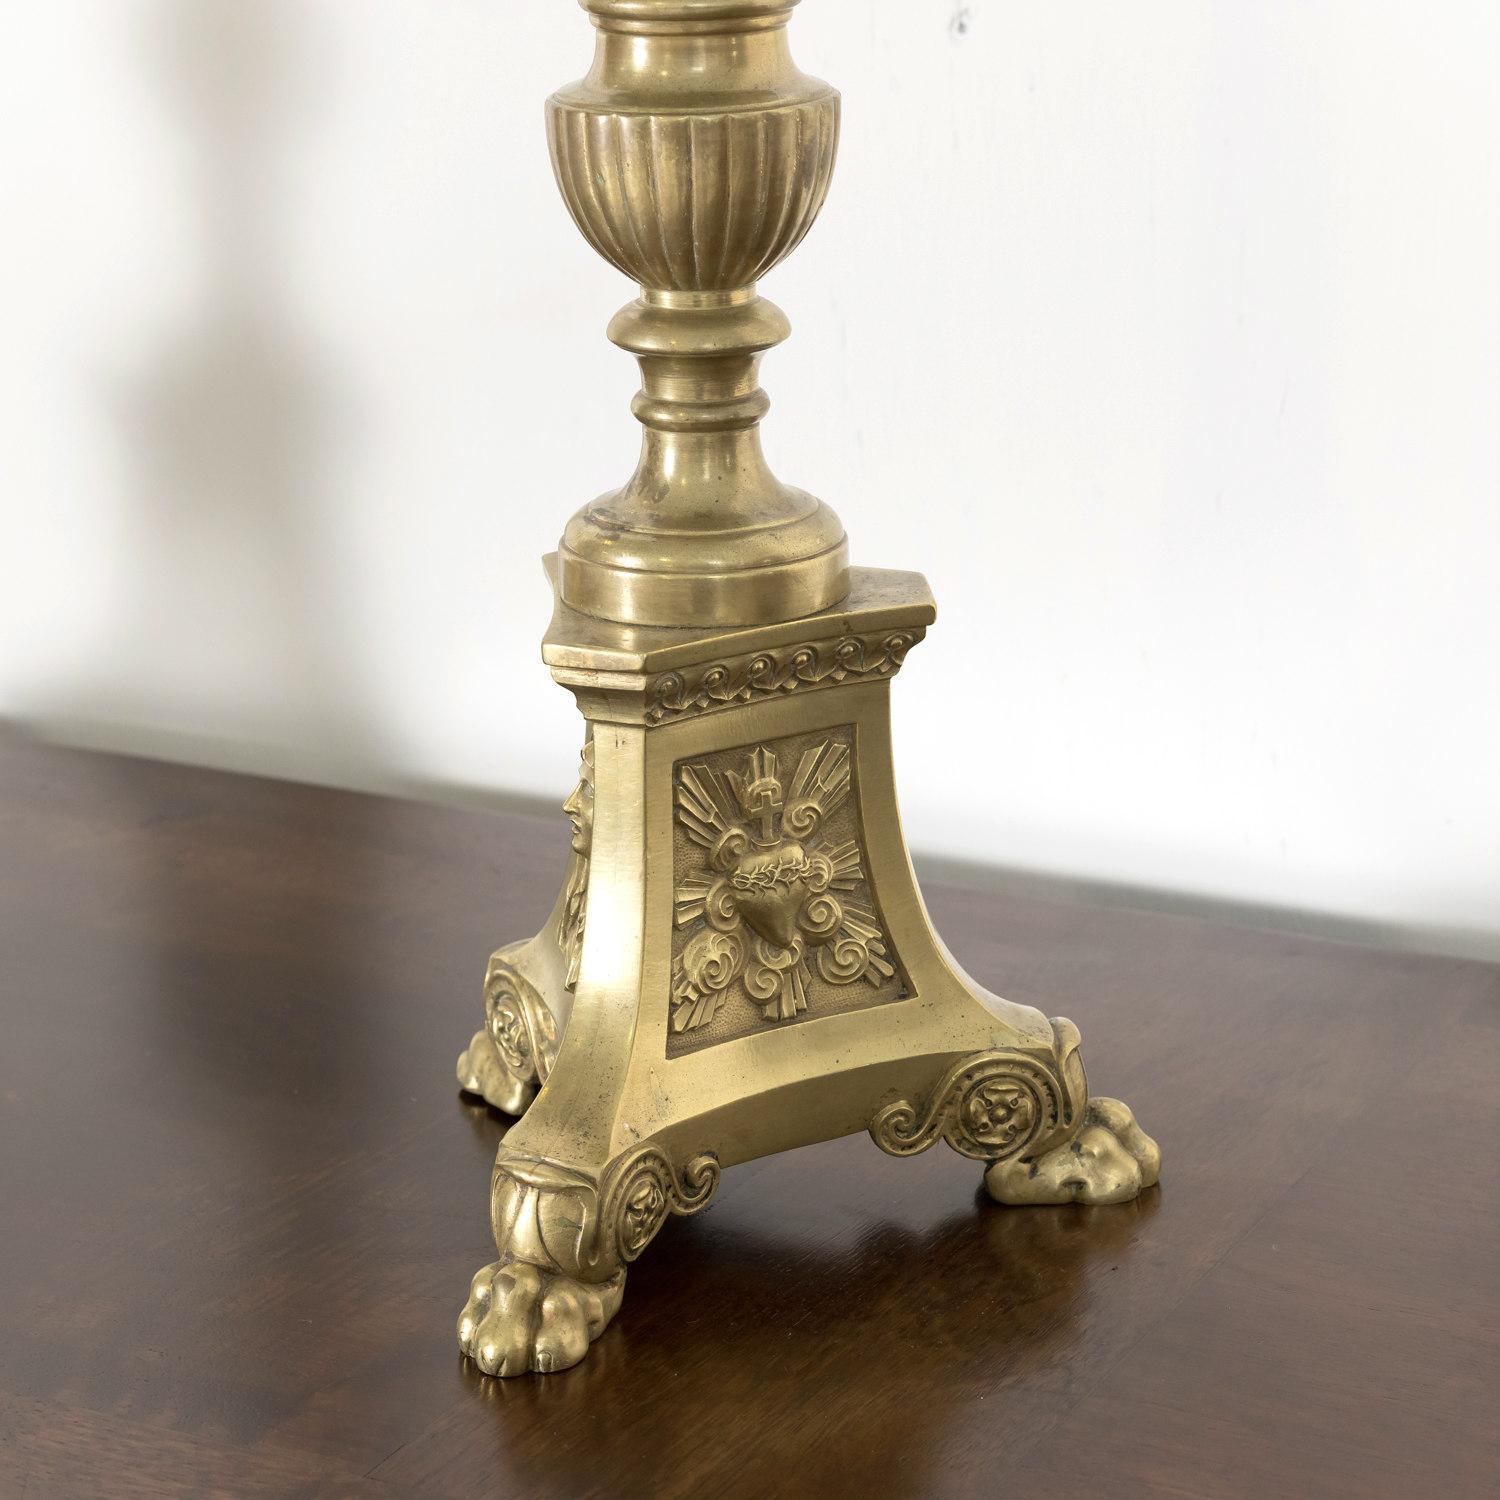 Large Pair of 19th Century French Solid Brass Altar Prickets or Candlesticks For Sale 10